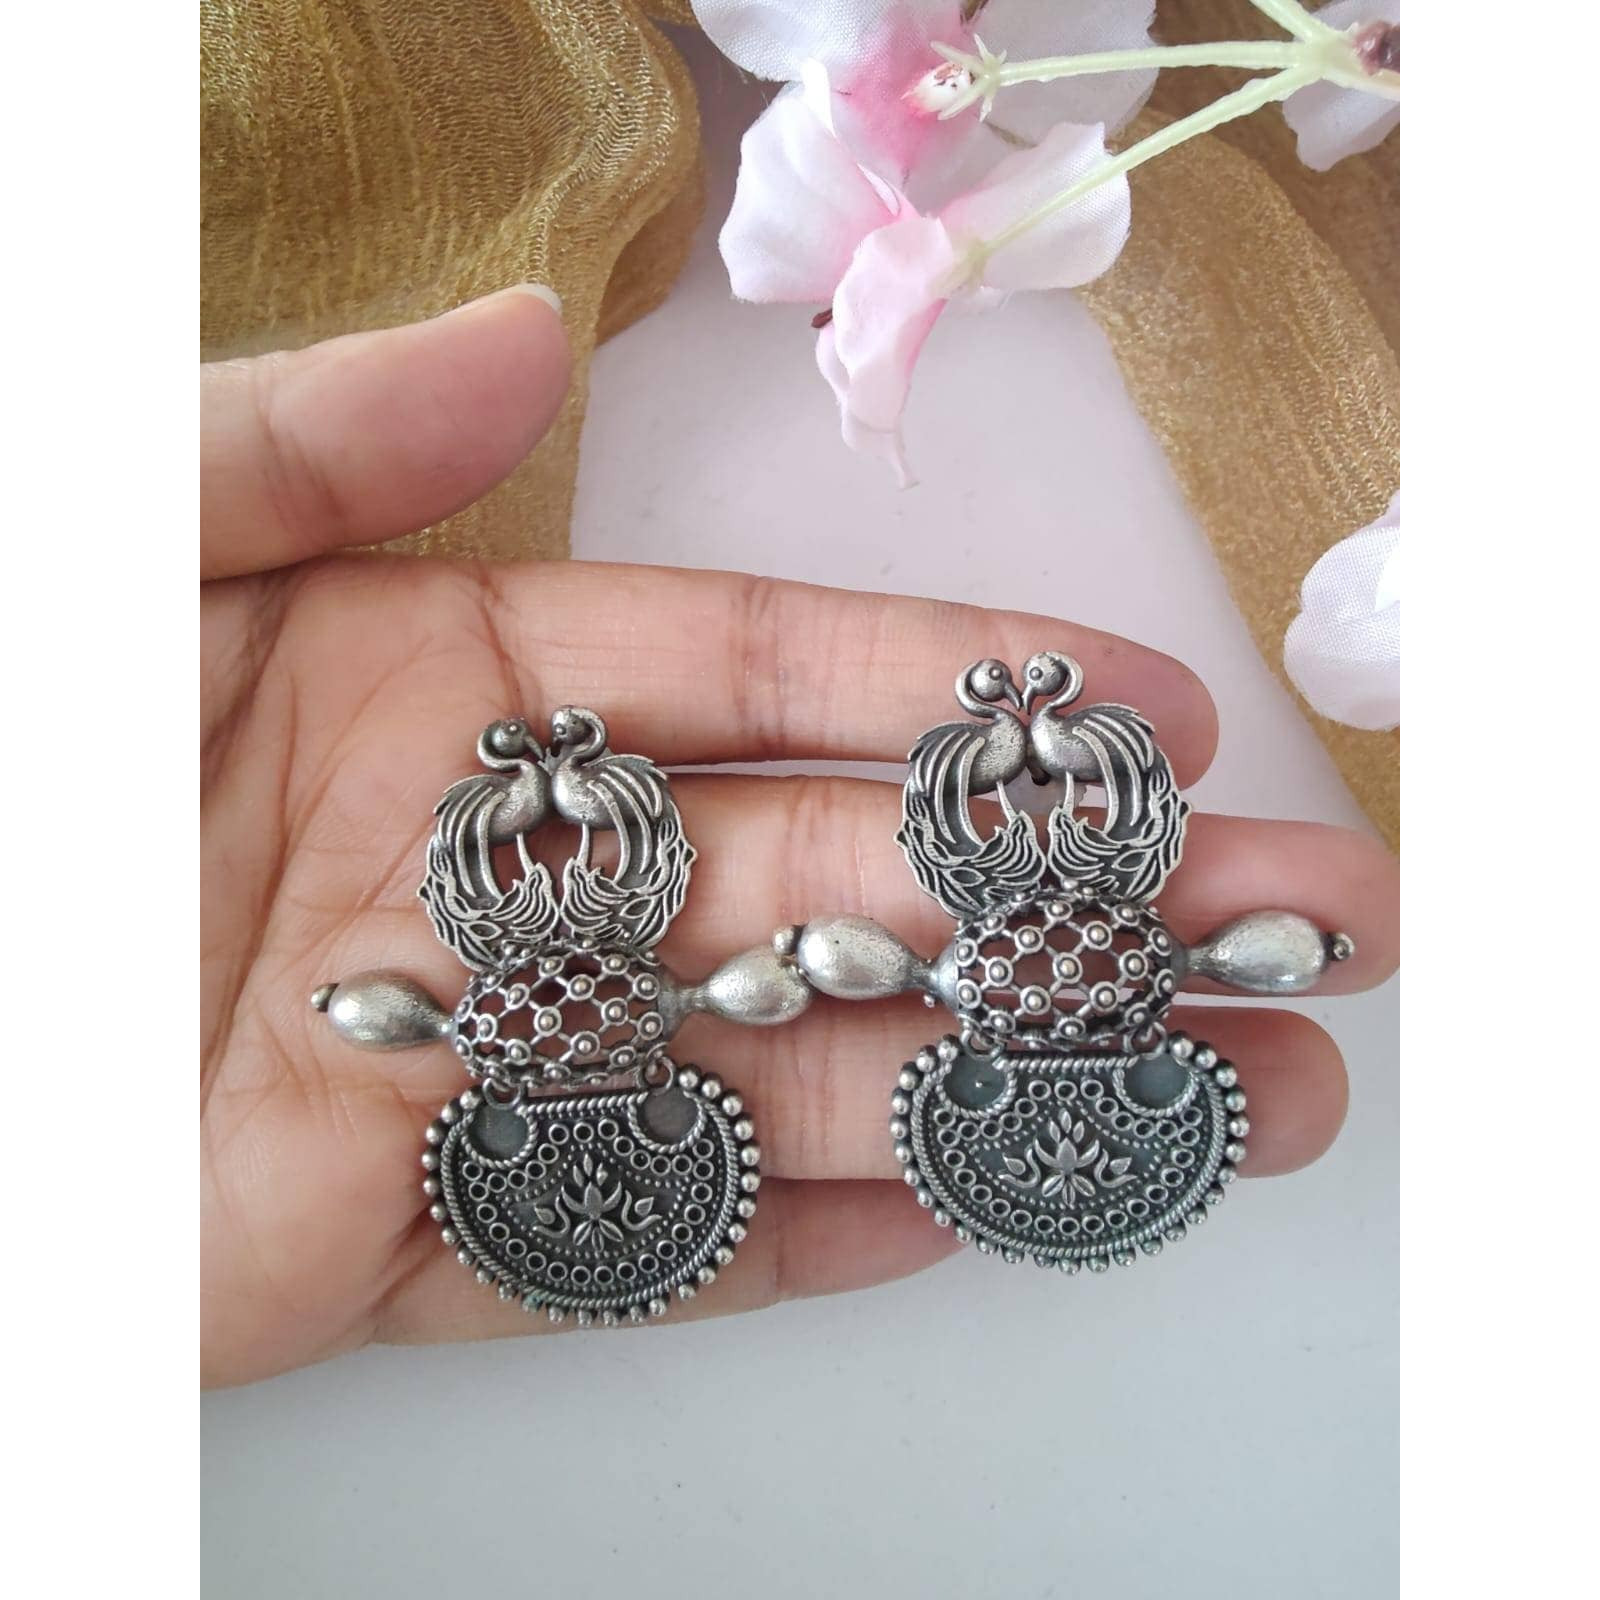 Nothing can beat the basic earrings when it comes to smartness quotient. Our Silver Oxidized  Earrings, Minimal and to the point, these earrings impart an effortless take to accessorising. These earrings are just what you need to complete a casual denim look or breezy dresses on hot summer days.